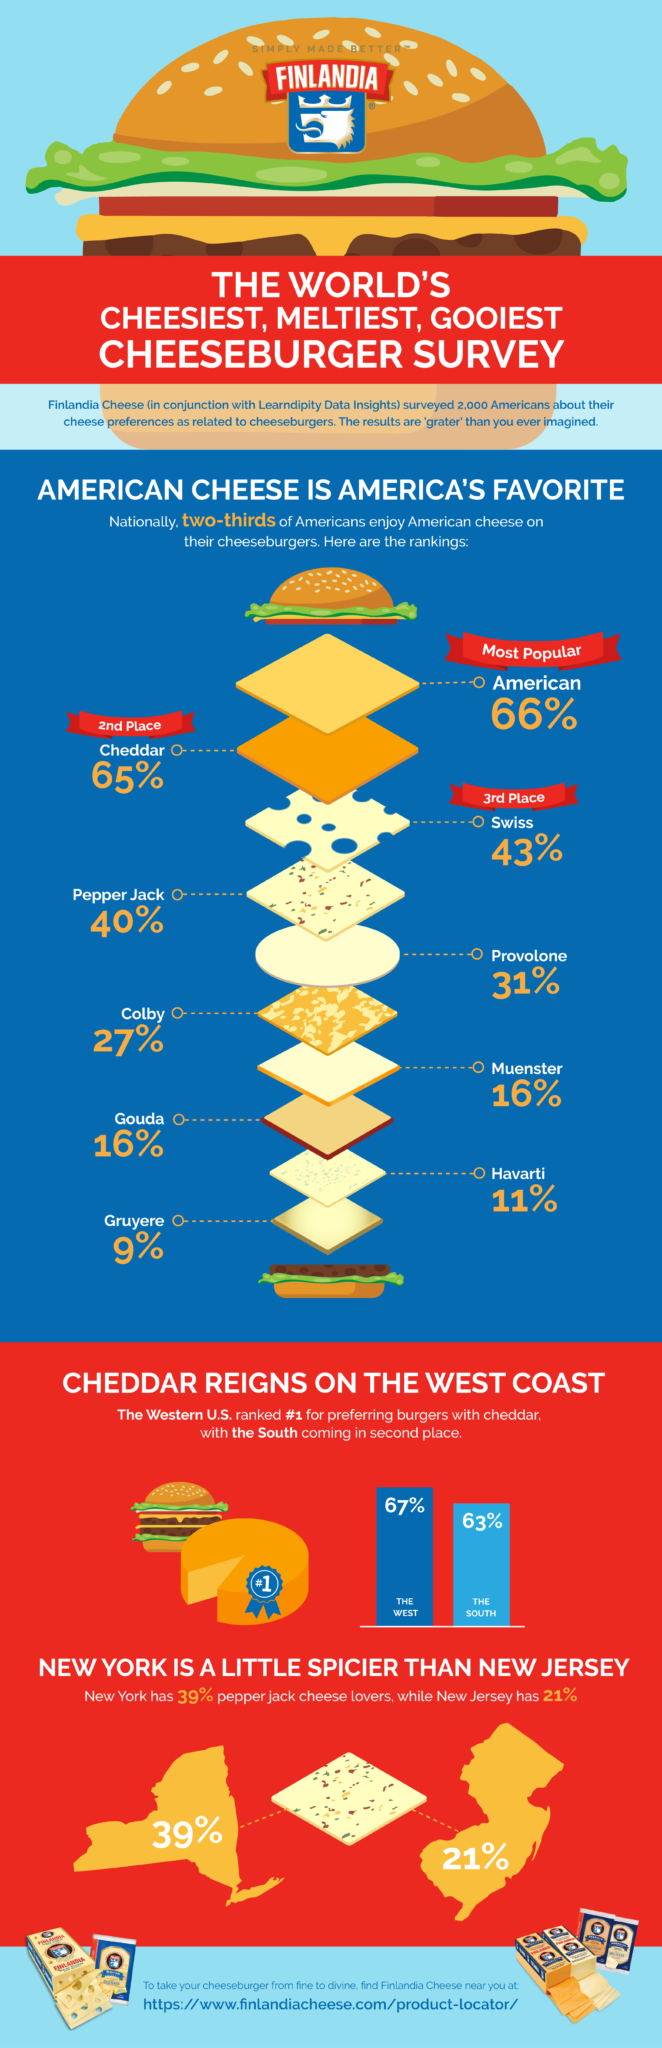 cheeseburger day infographic 842px